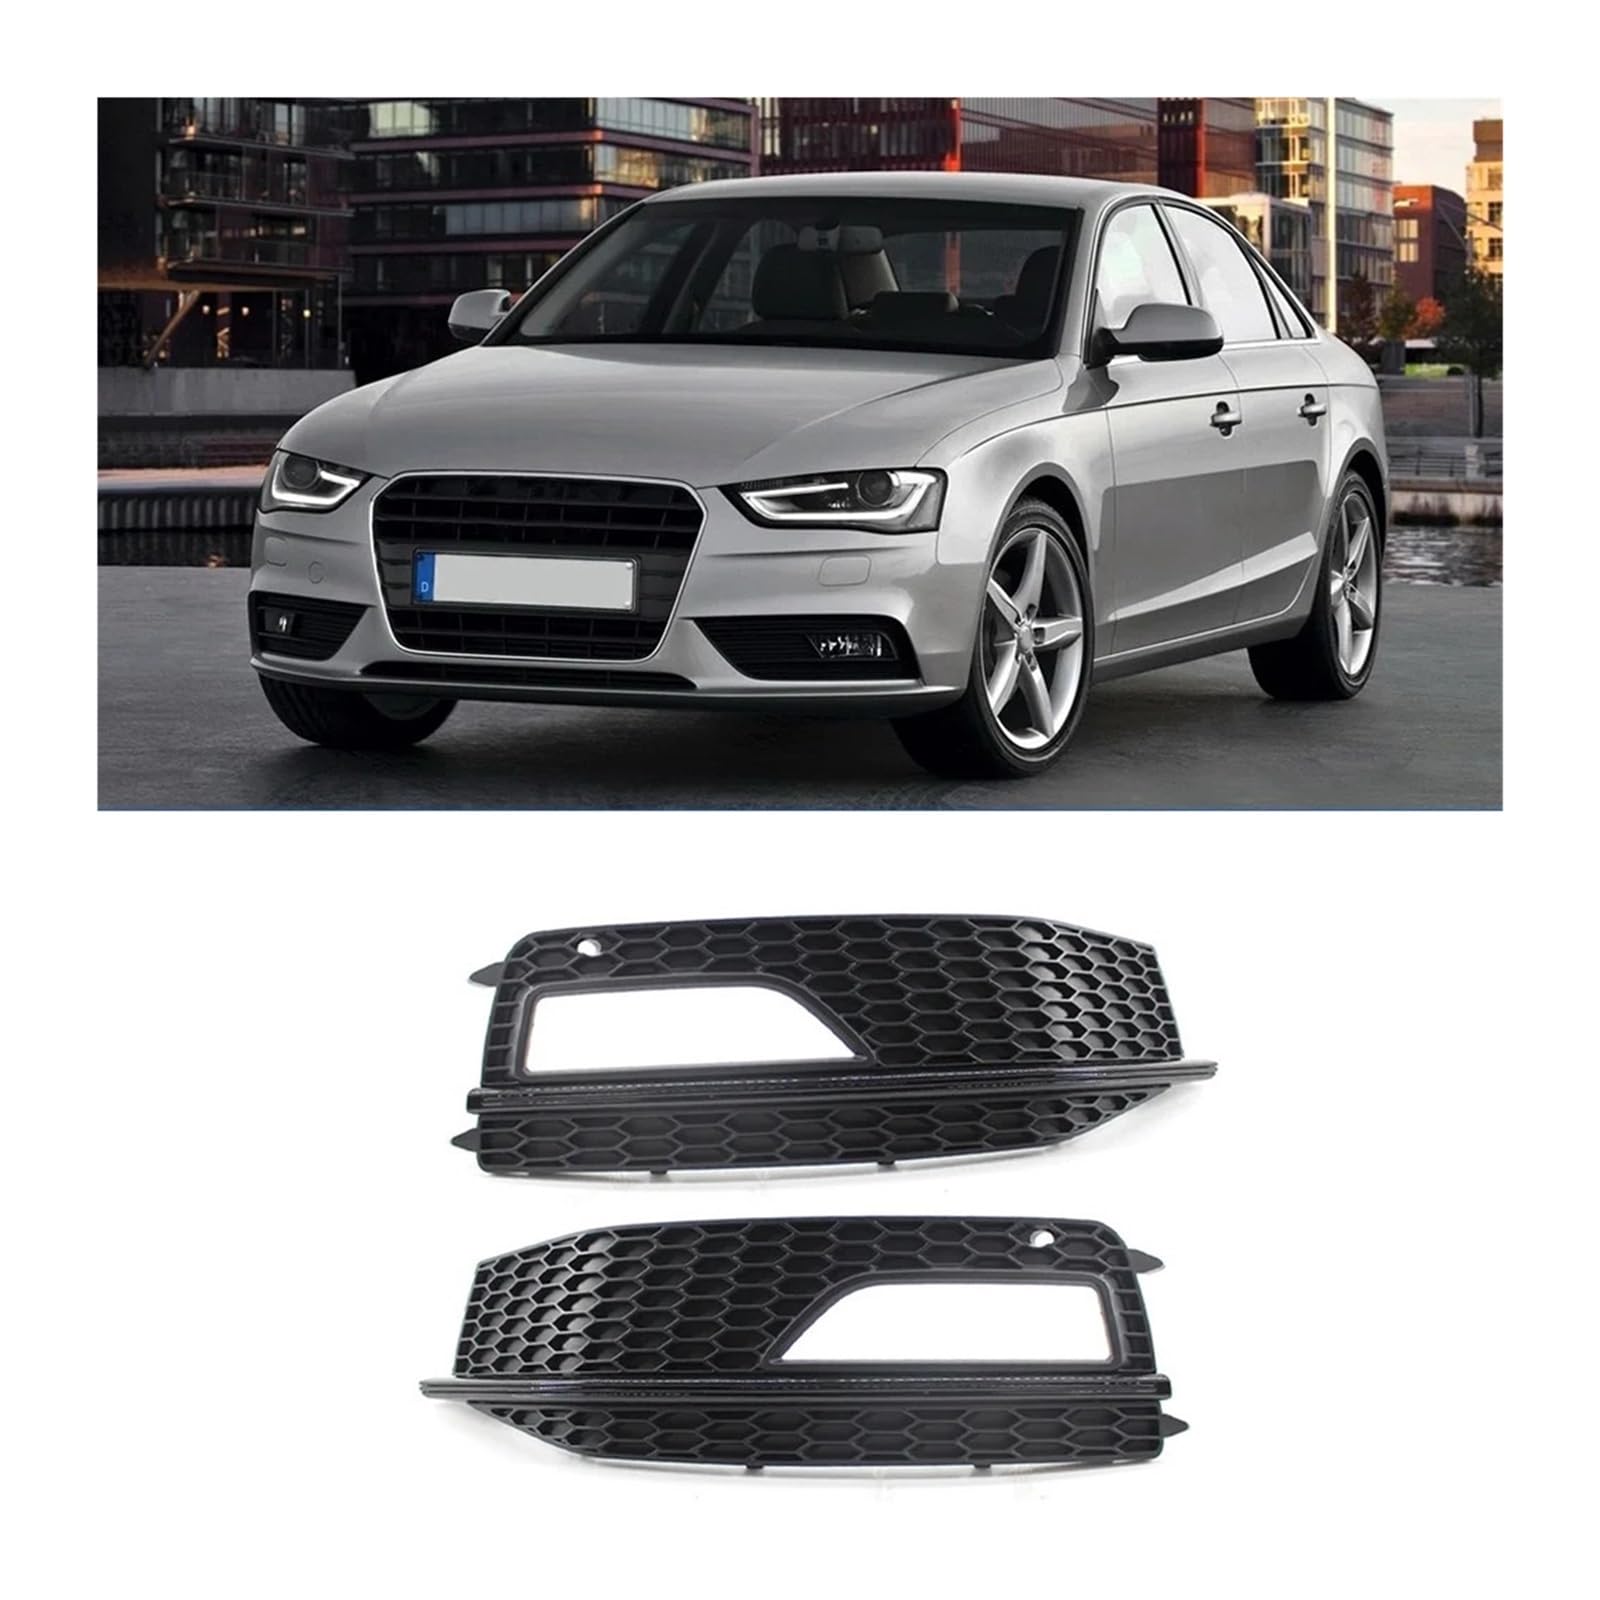 1 Pair Car Front Grille Mesh Fog Light Grill Grills Grill Cover Replacement Compatible For Audi A4 B8 2012-2015 S4 S-Line Facelift(Left) von BRANISLVV